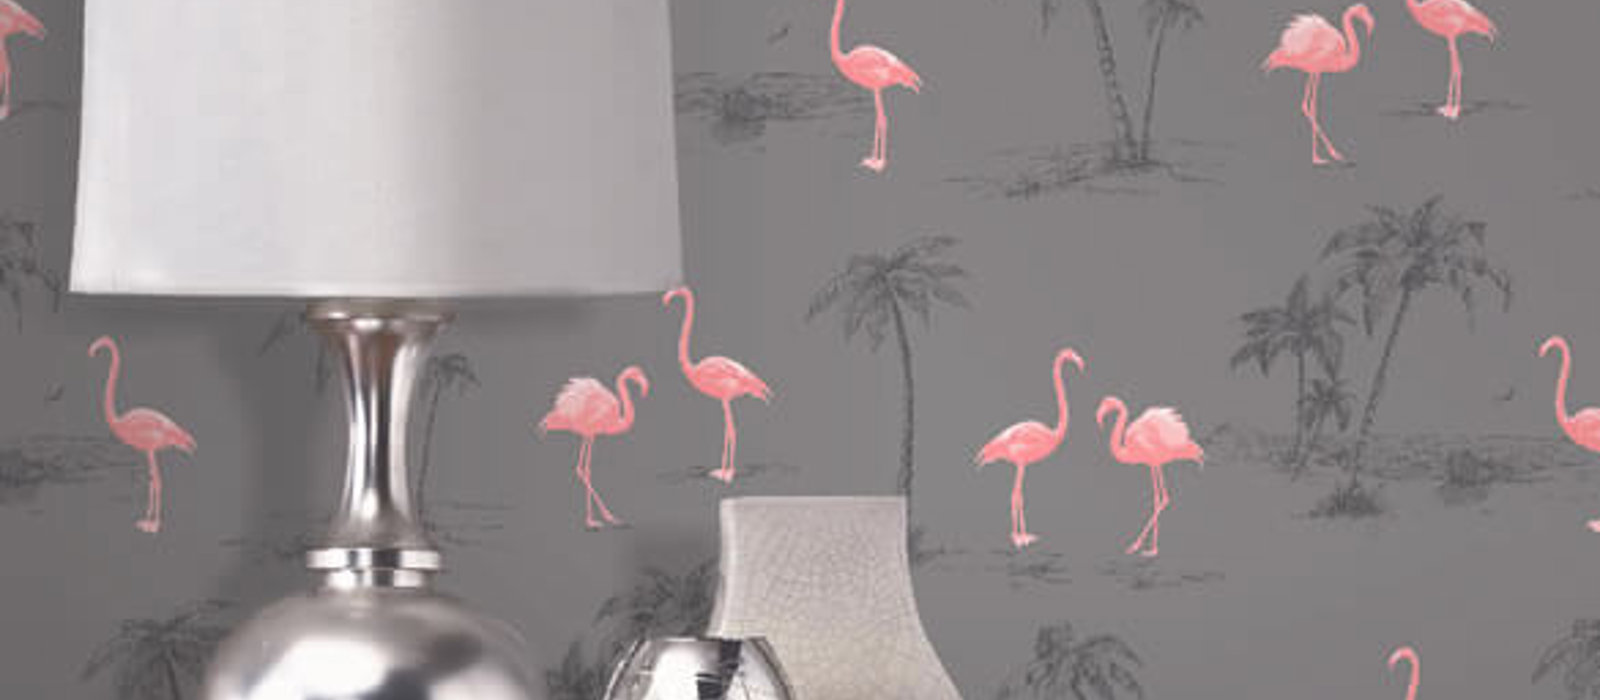 Wallpaper with pink flamingos in a neutral room